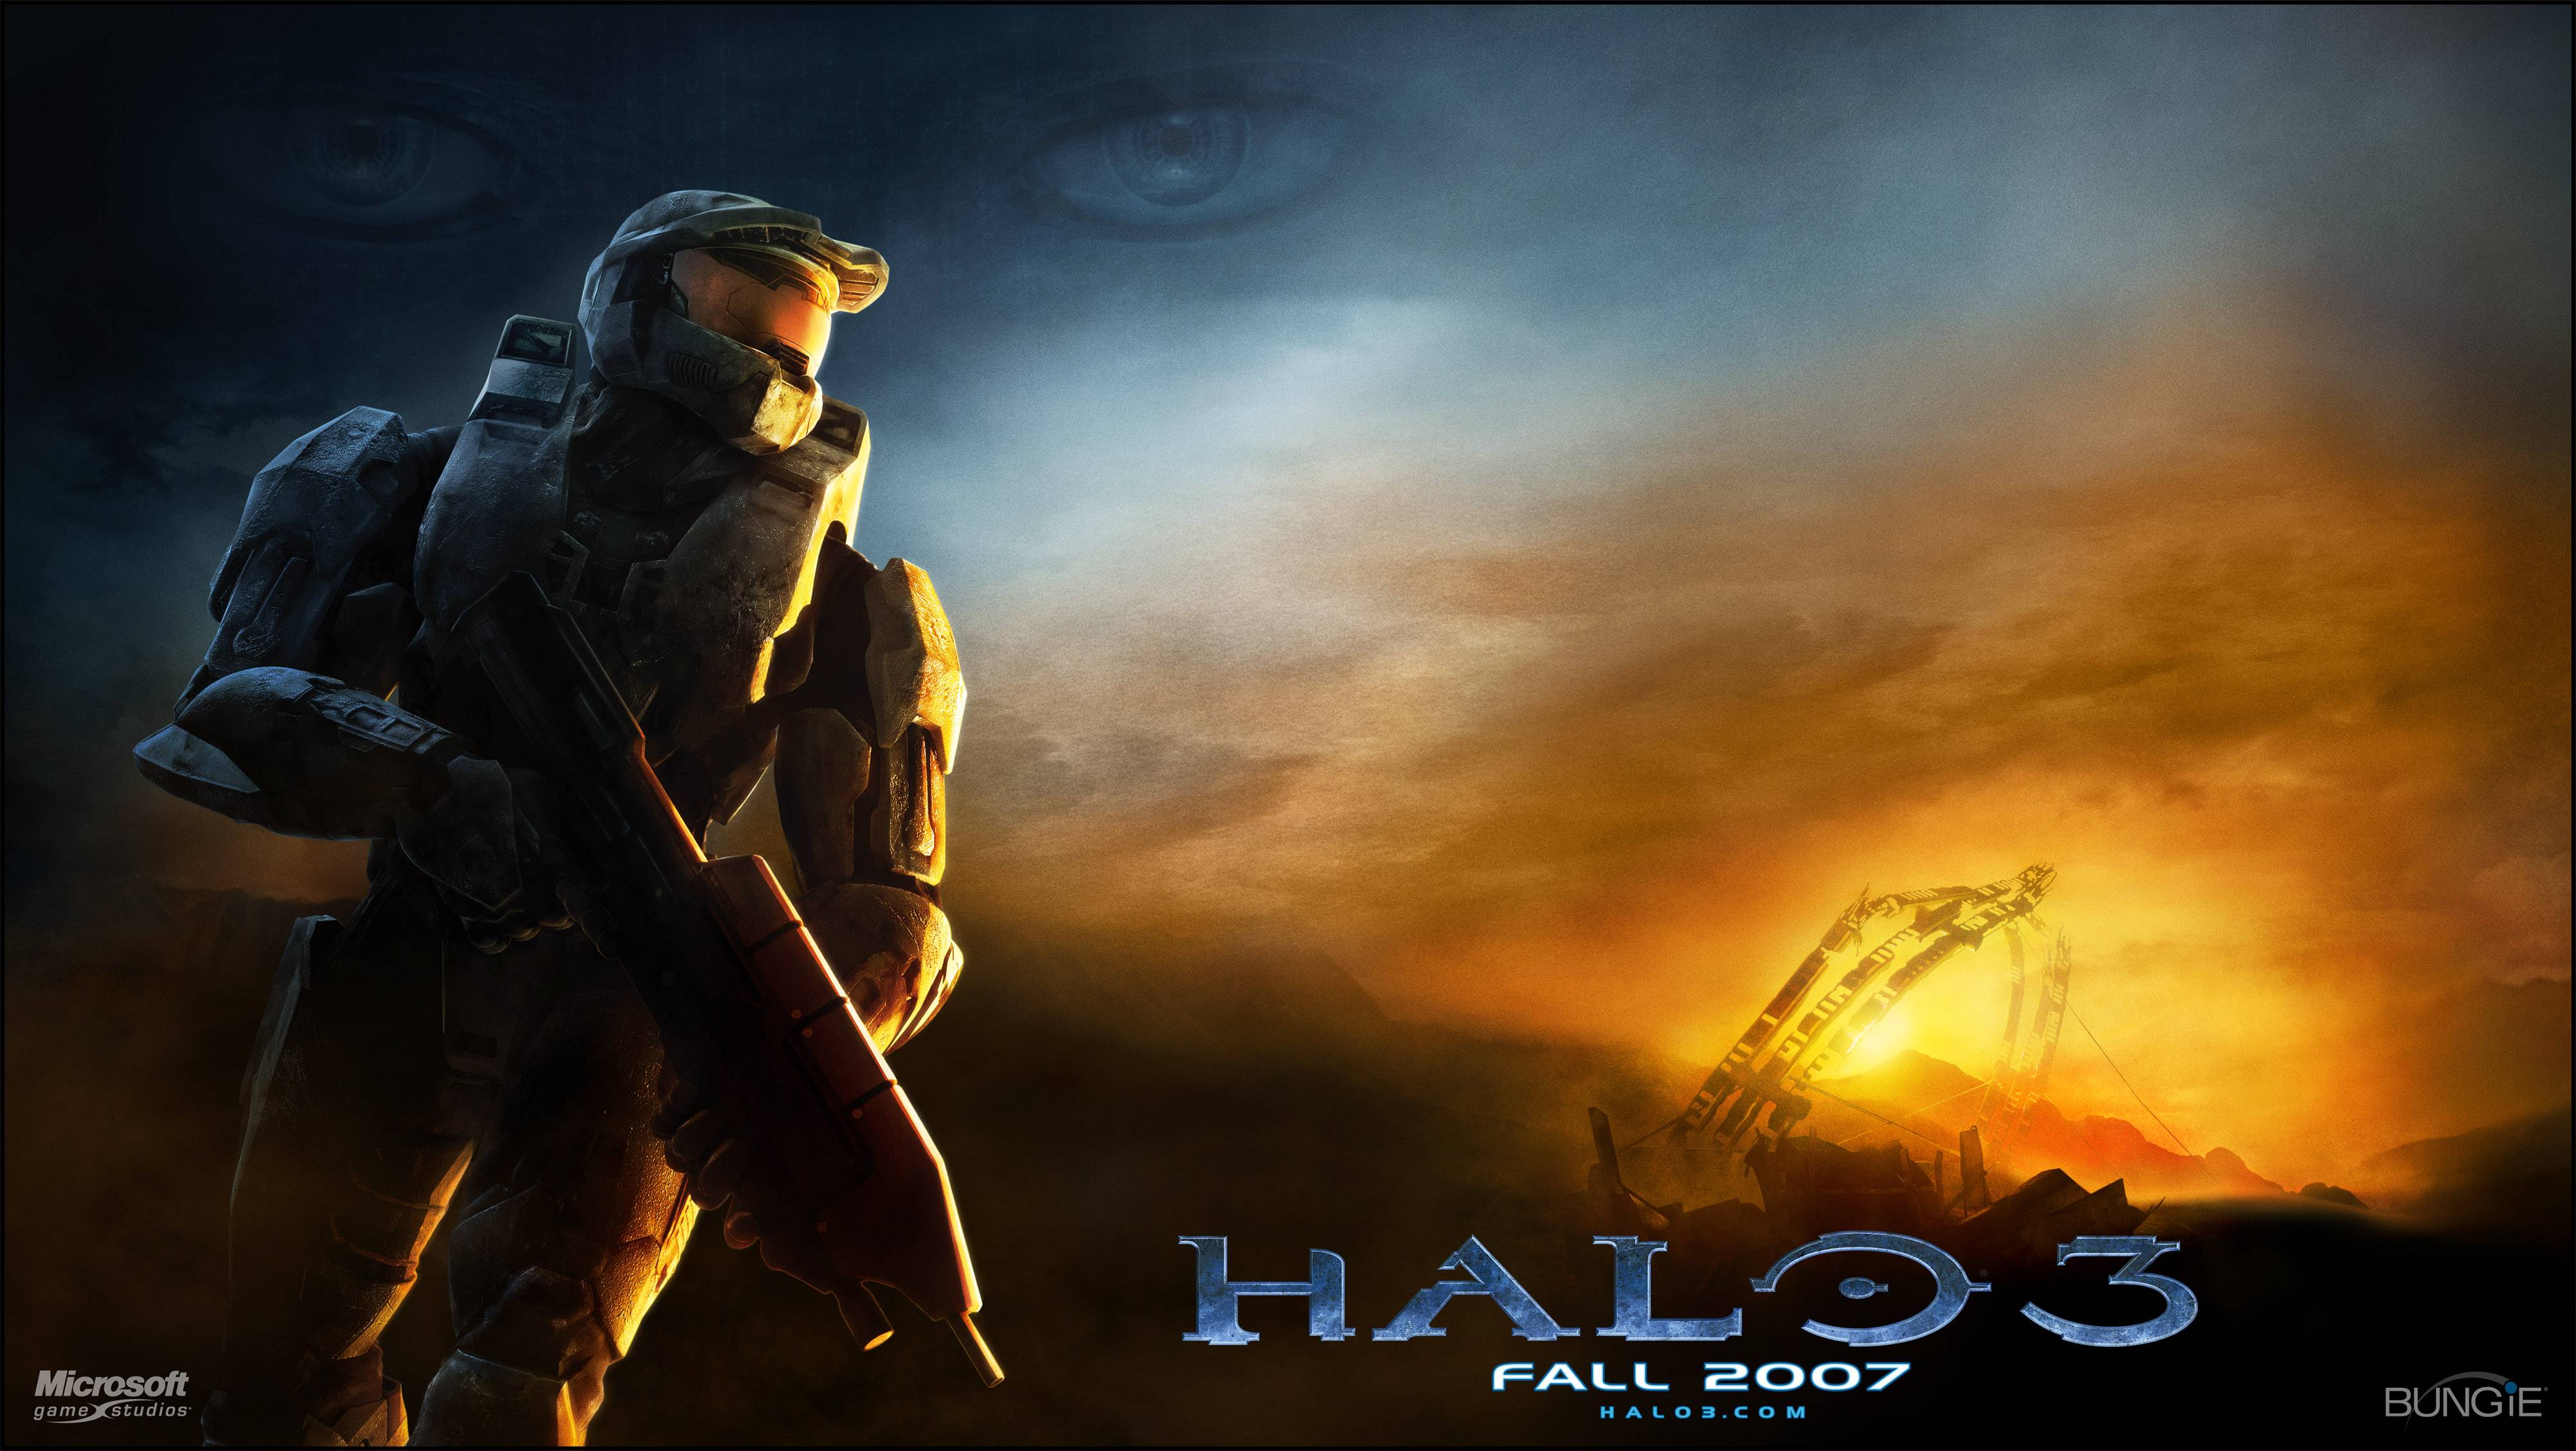 Wallpapers For > Halo 3 Wallpapers Hd Master Chief